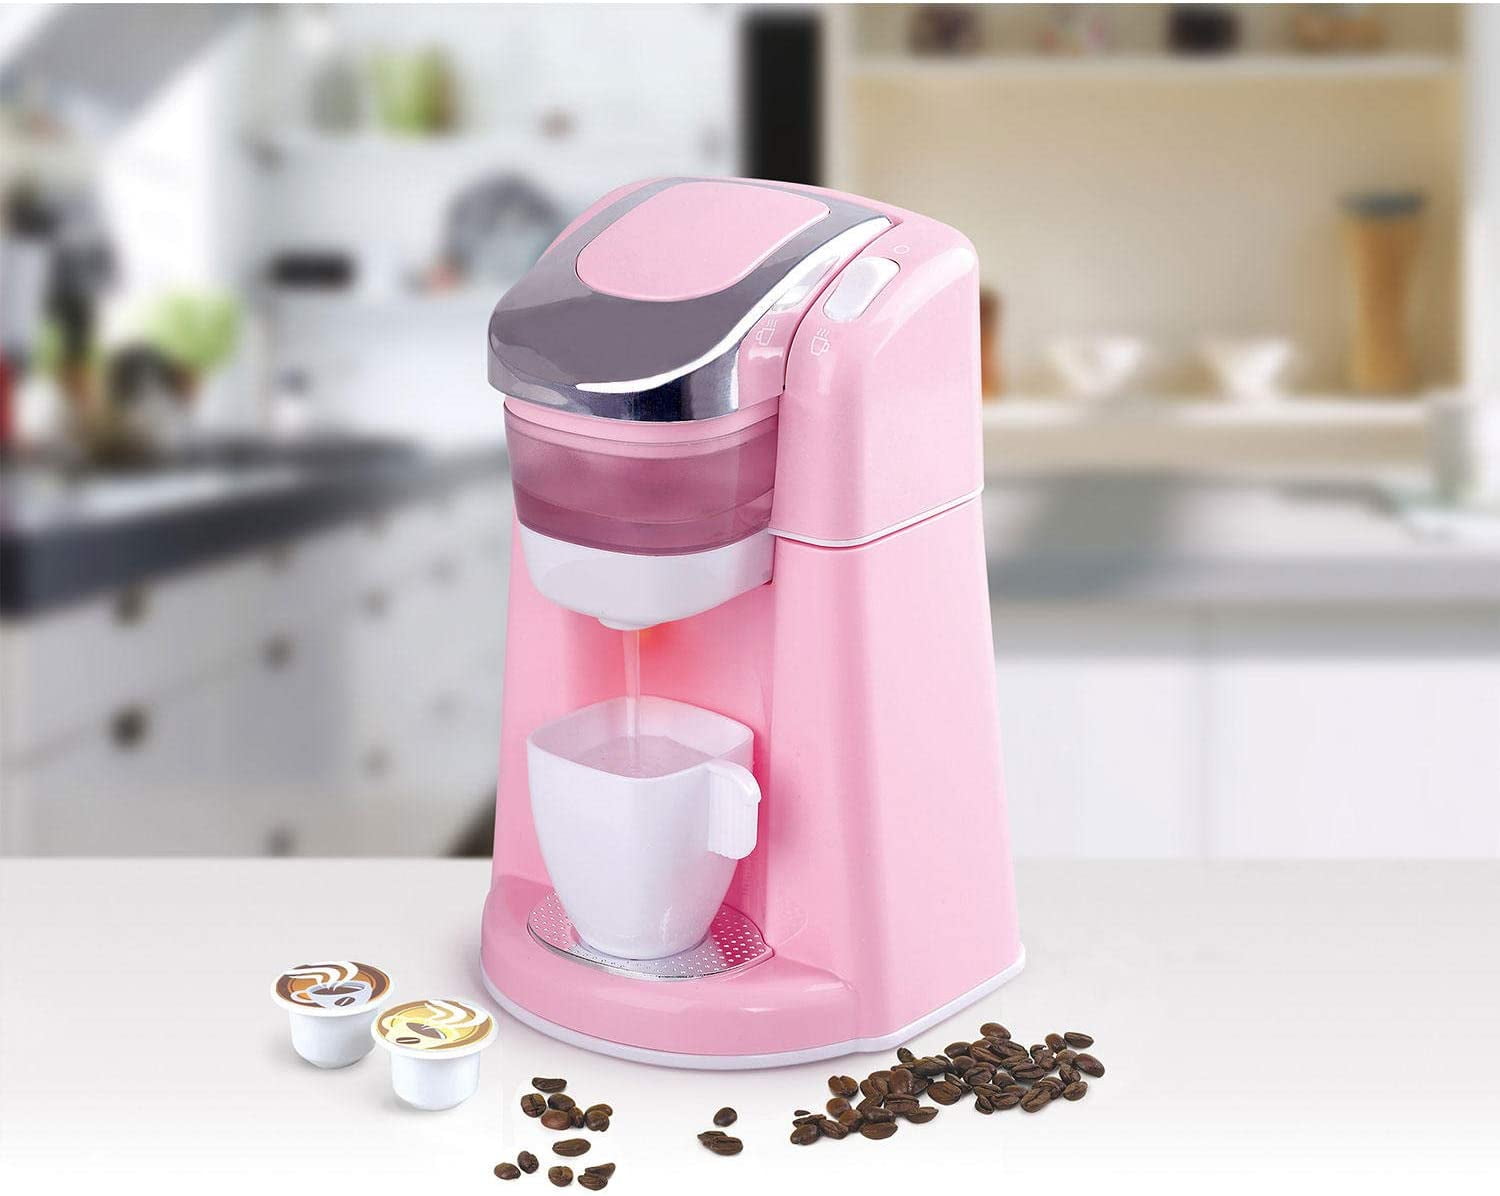 Kitchen Appliances GOURMET Child Size (Pink & Off White) w BATTERY Operated  COFFEE MAKER (Dispenses Water), Battery Operated MIX MASTER, and TOASTER